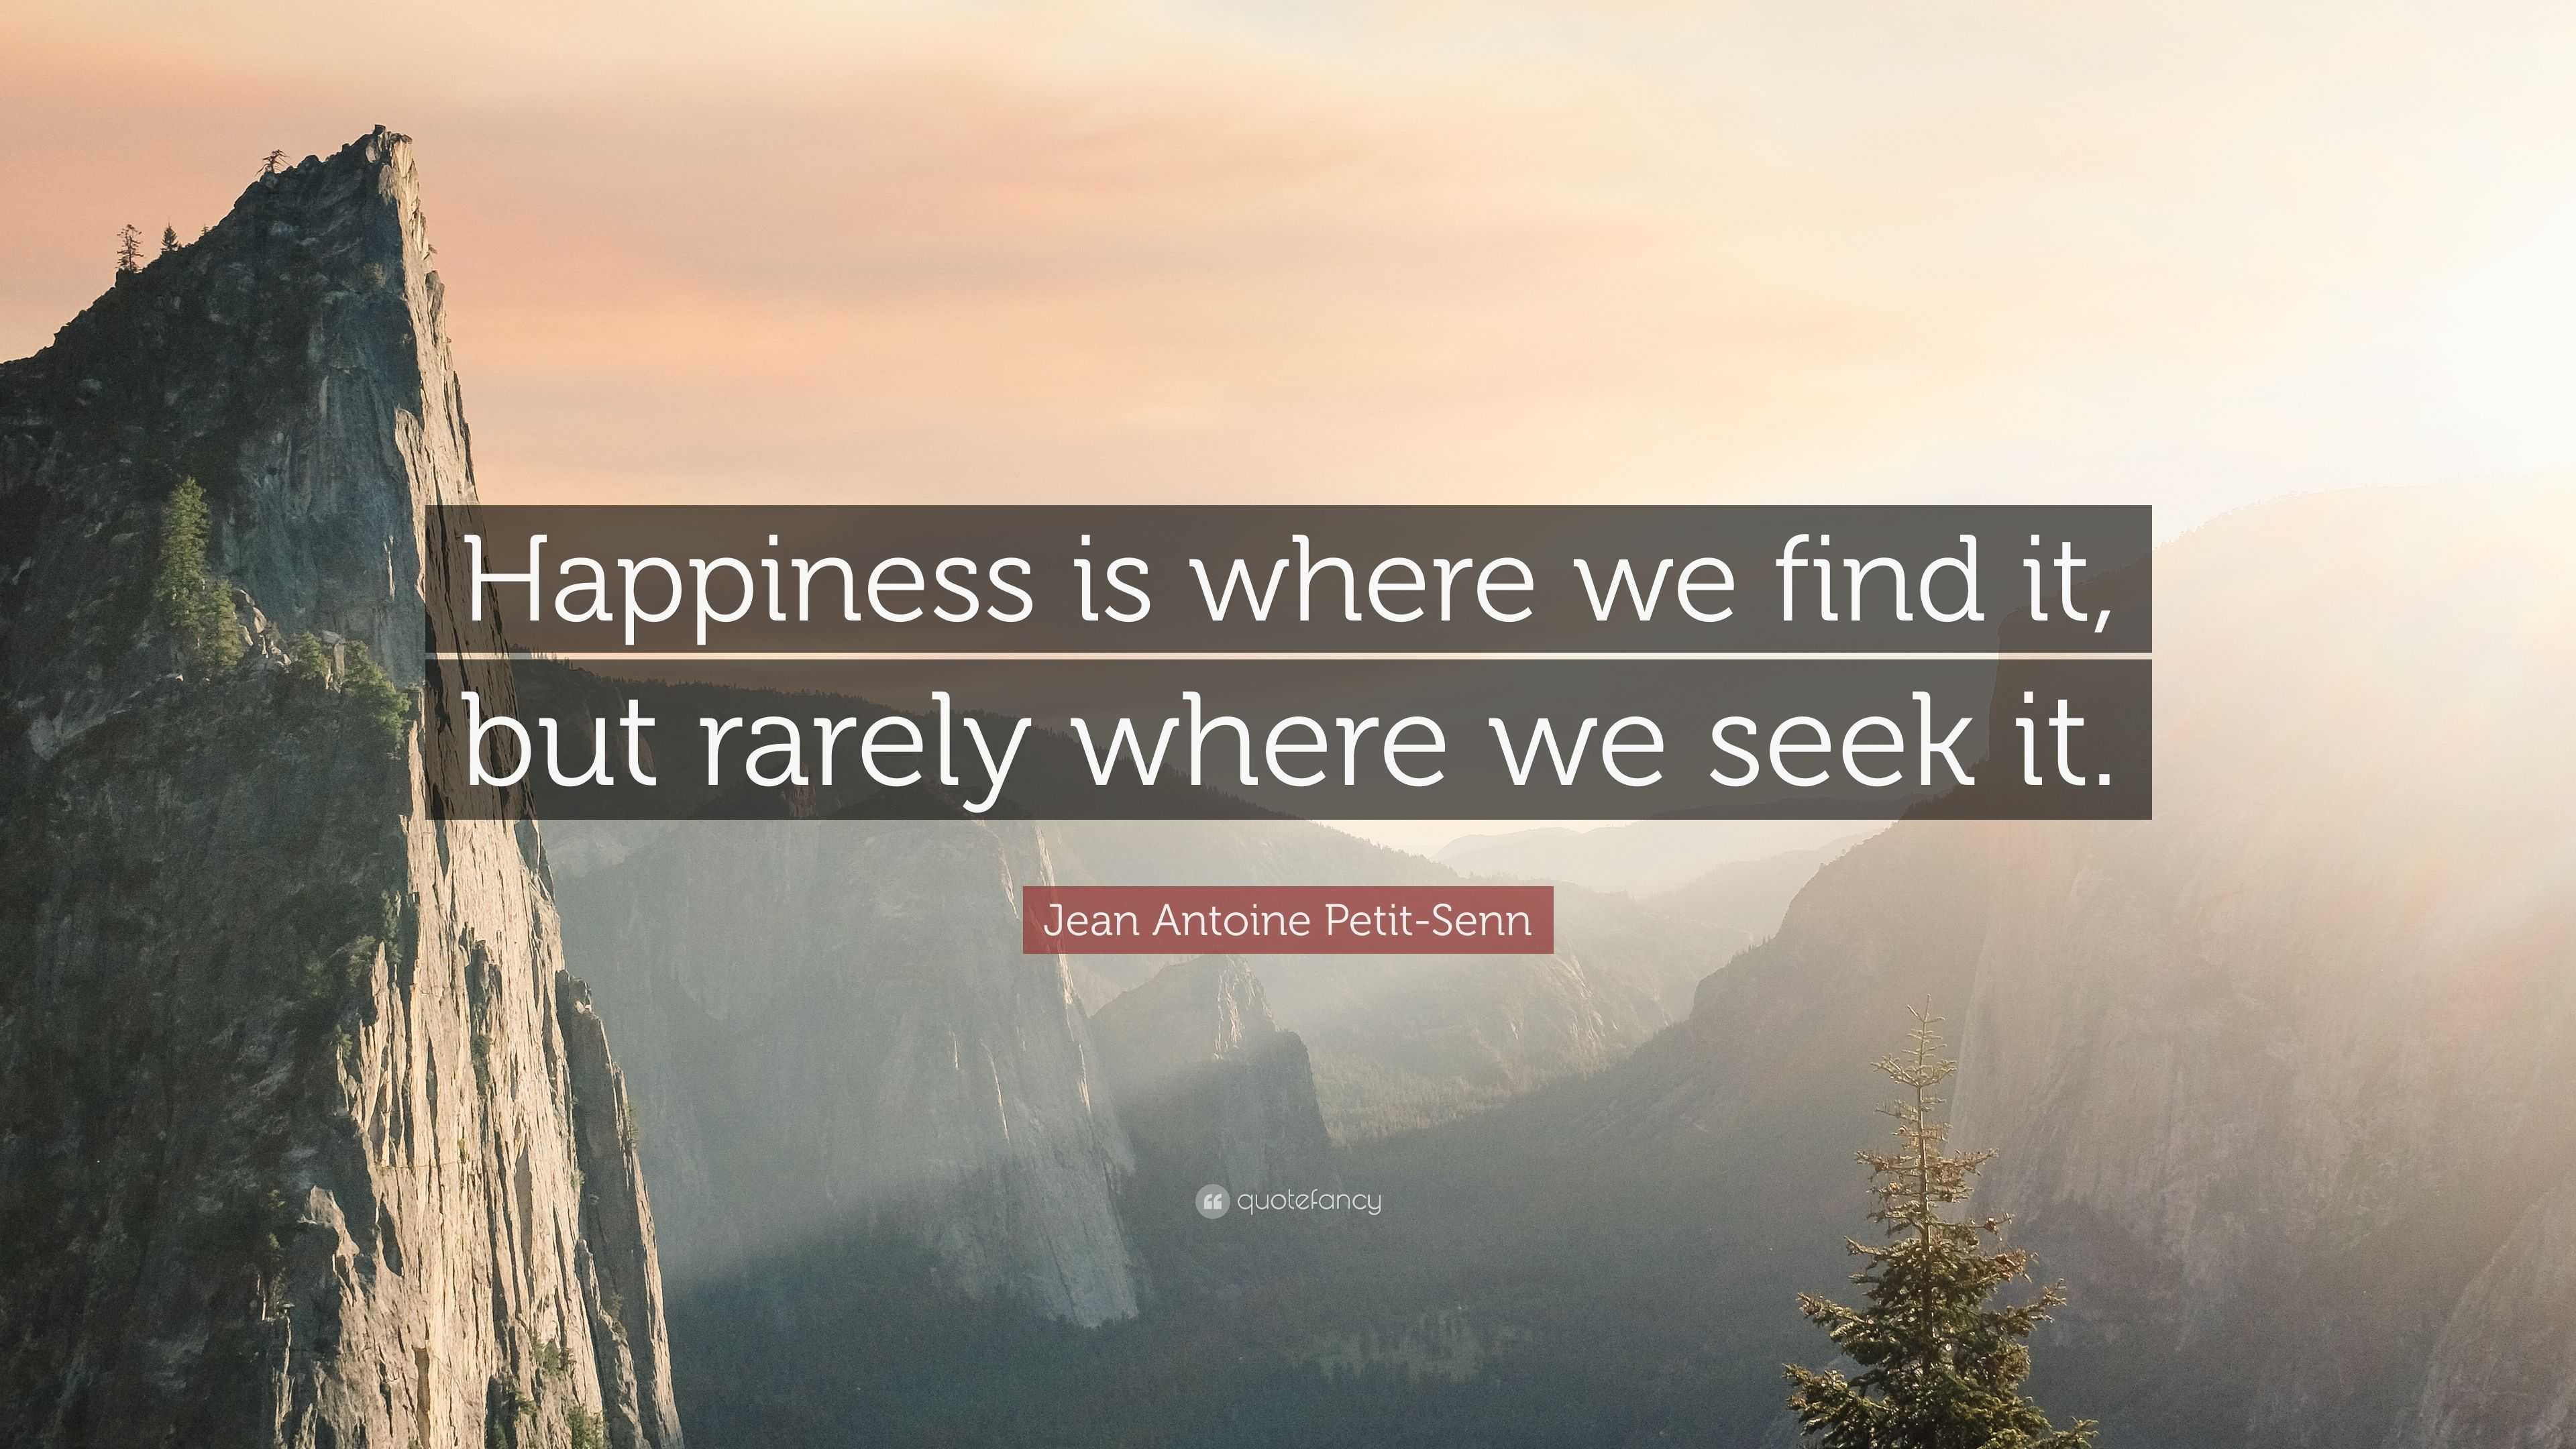 Jean Antoine Petit-Senn Quote: “Happiness is where we find it, but ...